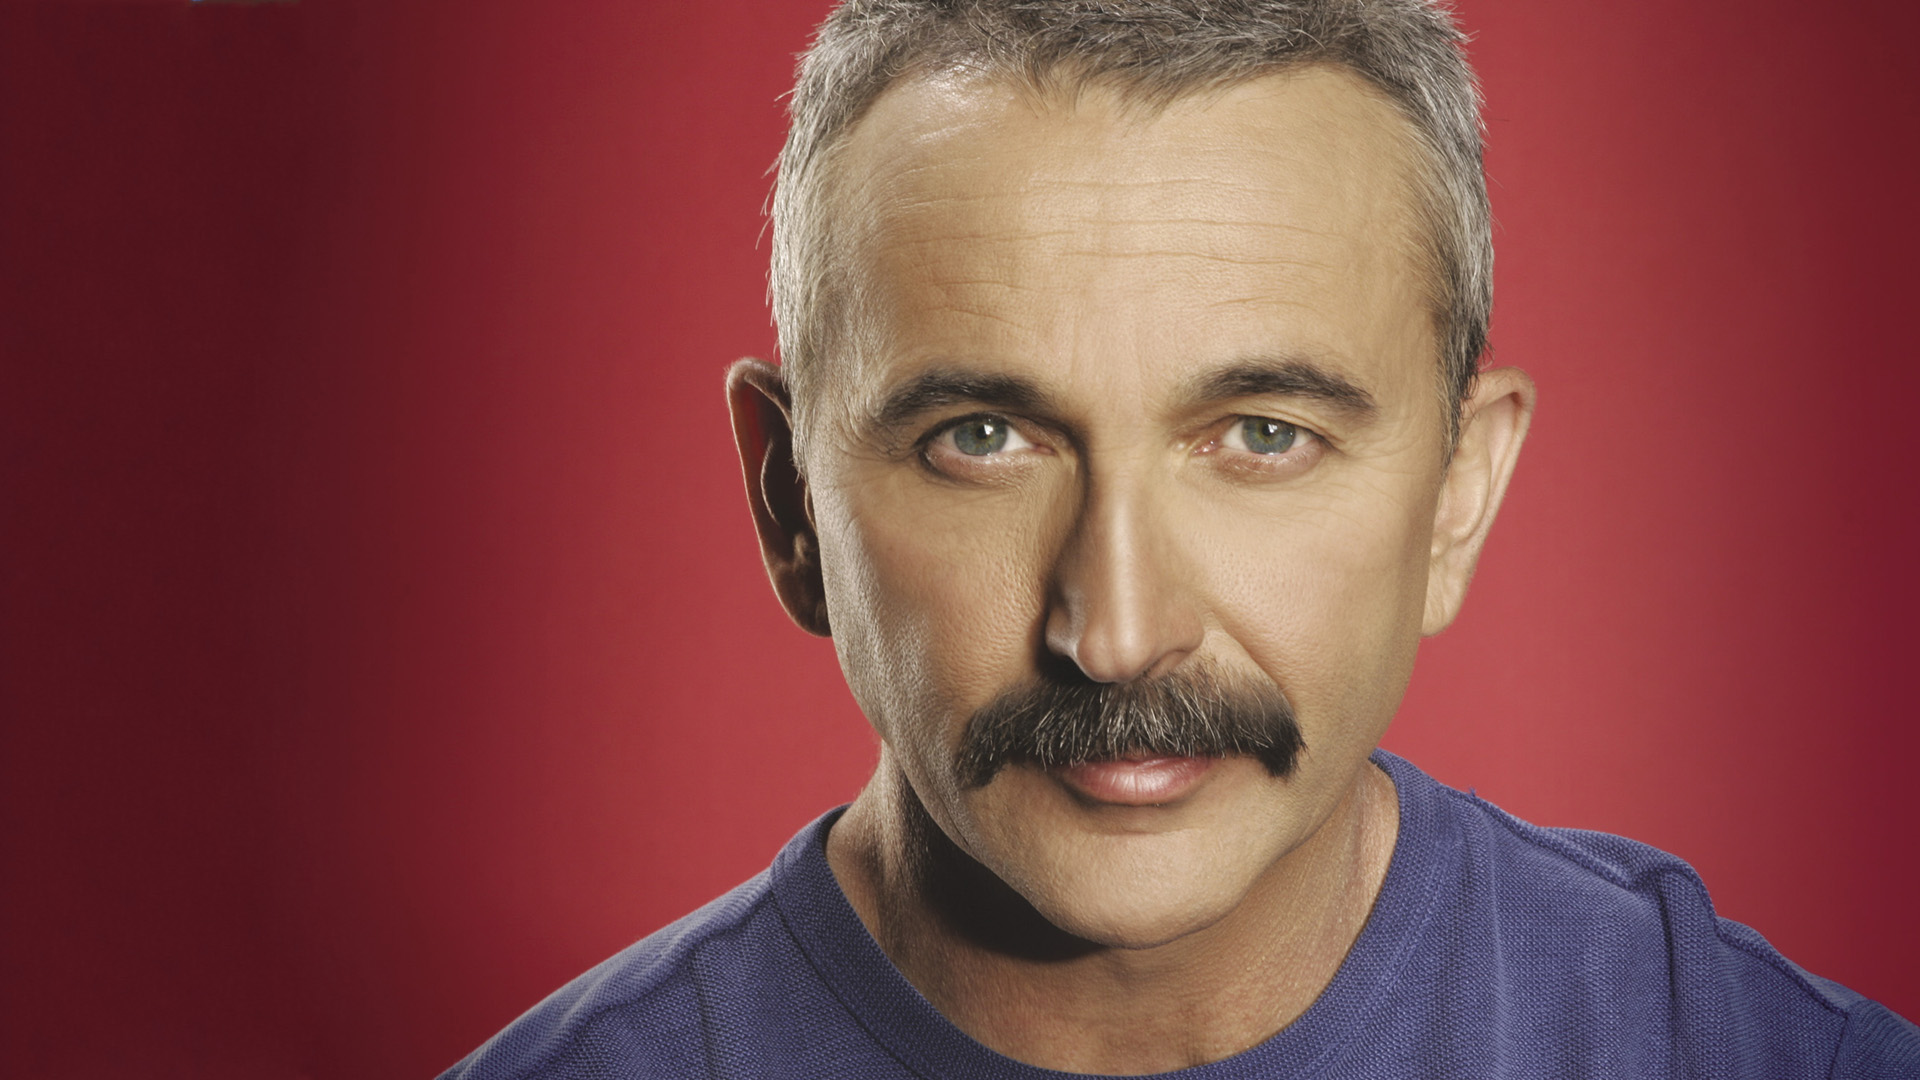 There Ain't Nothin' Wrong With The Radio av Aaron Tippin